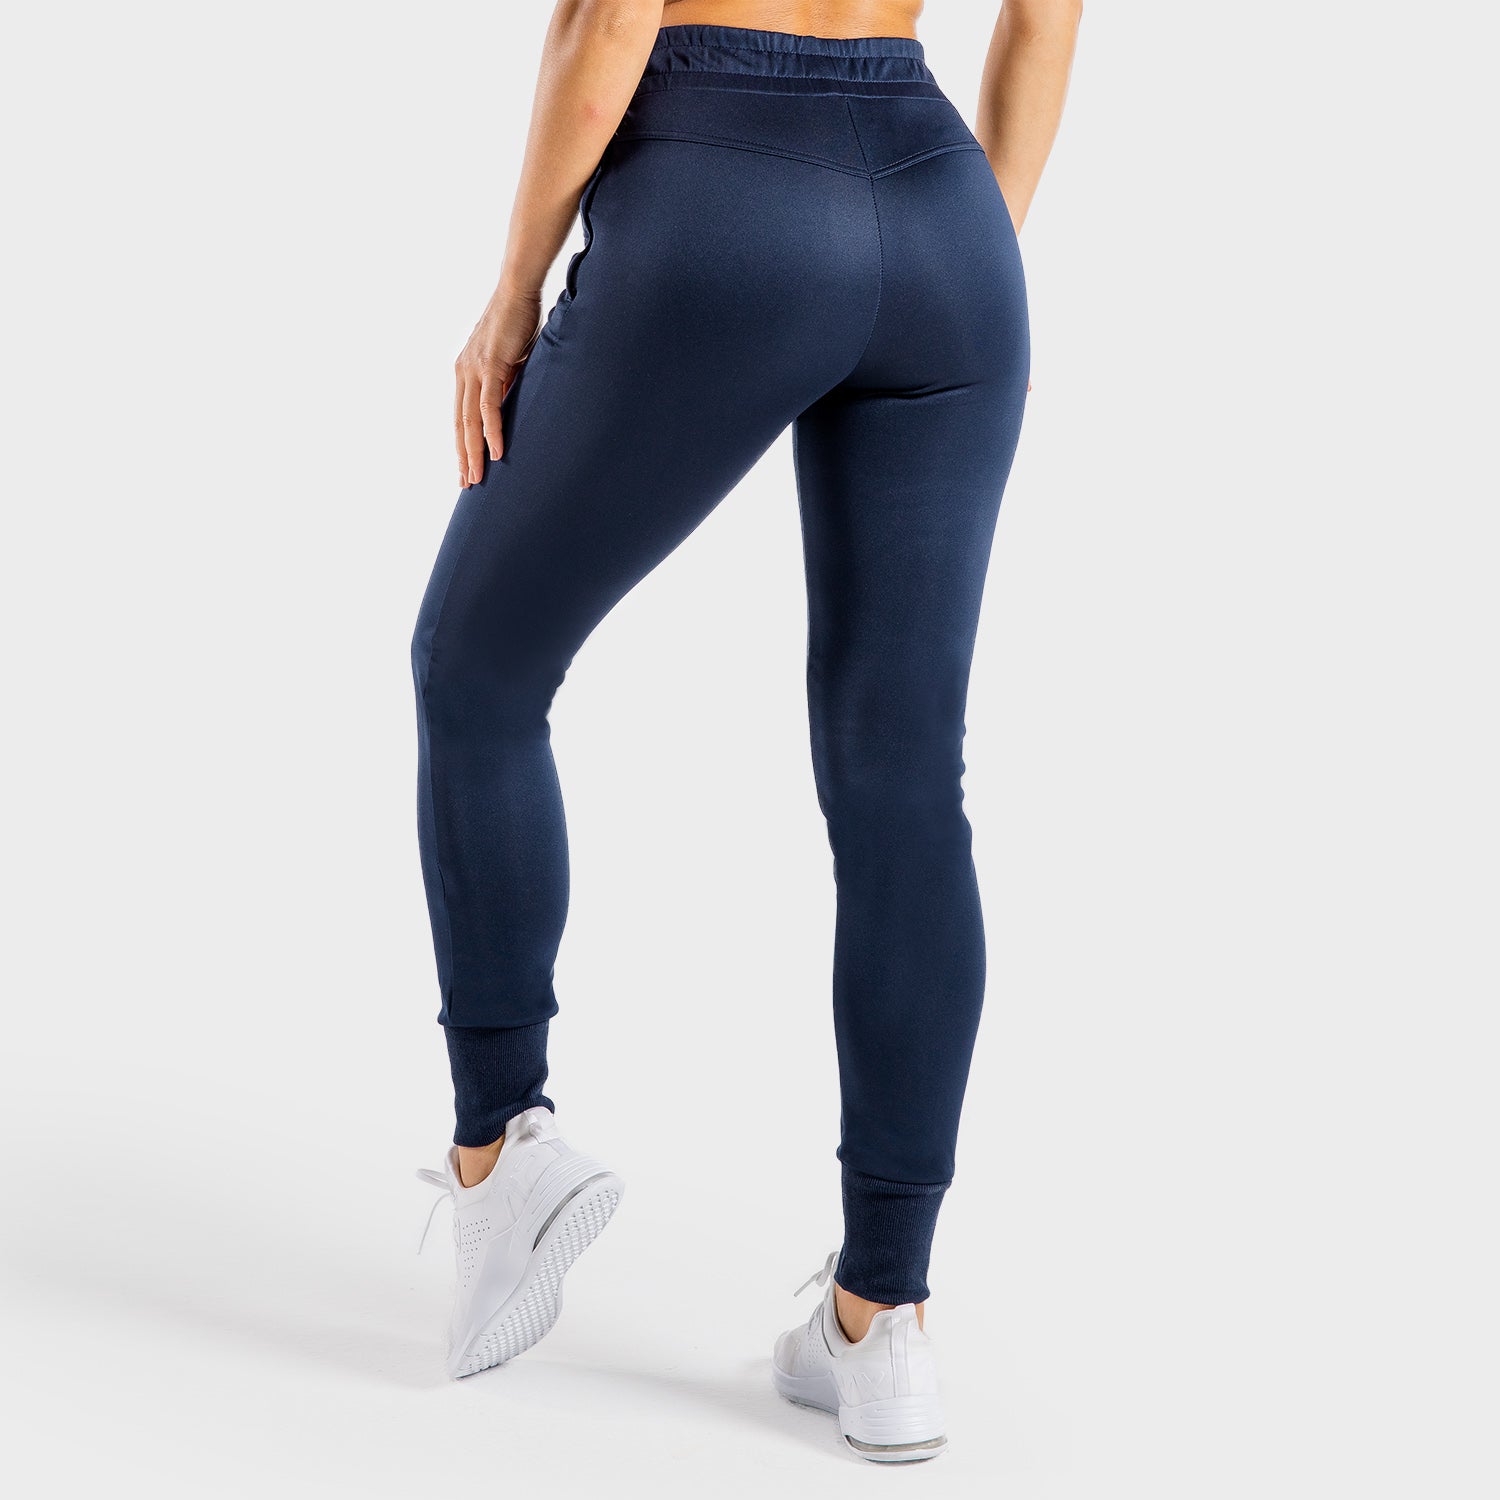 AE, She-Wolf Do-Knot-Joggers - Navy, Workout Pants Women